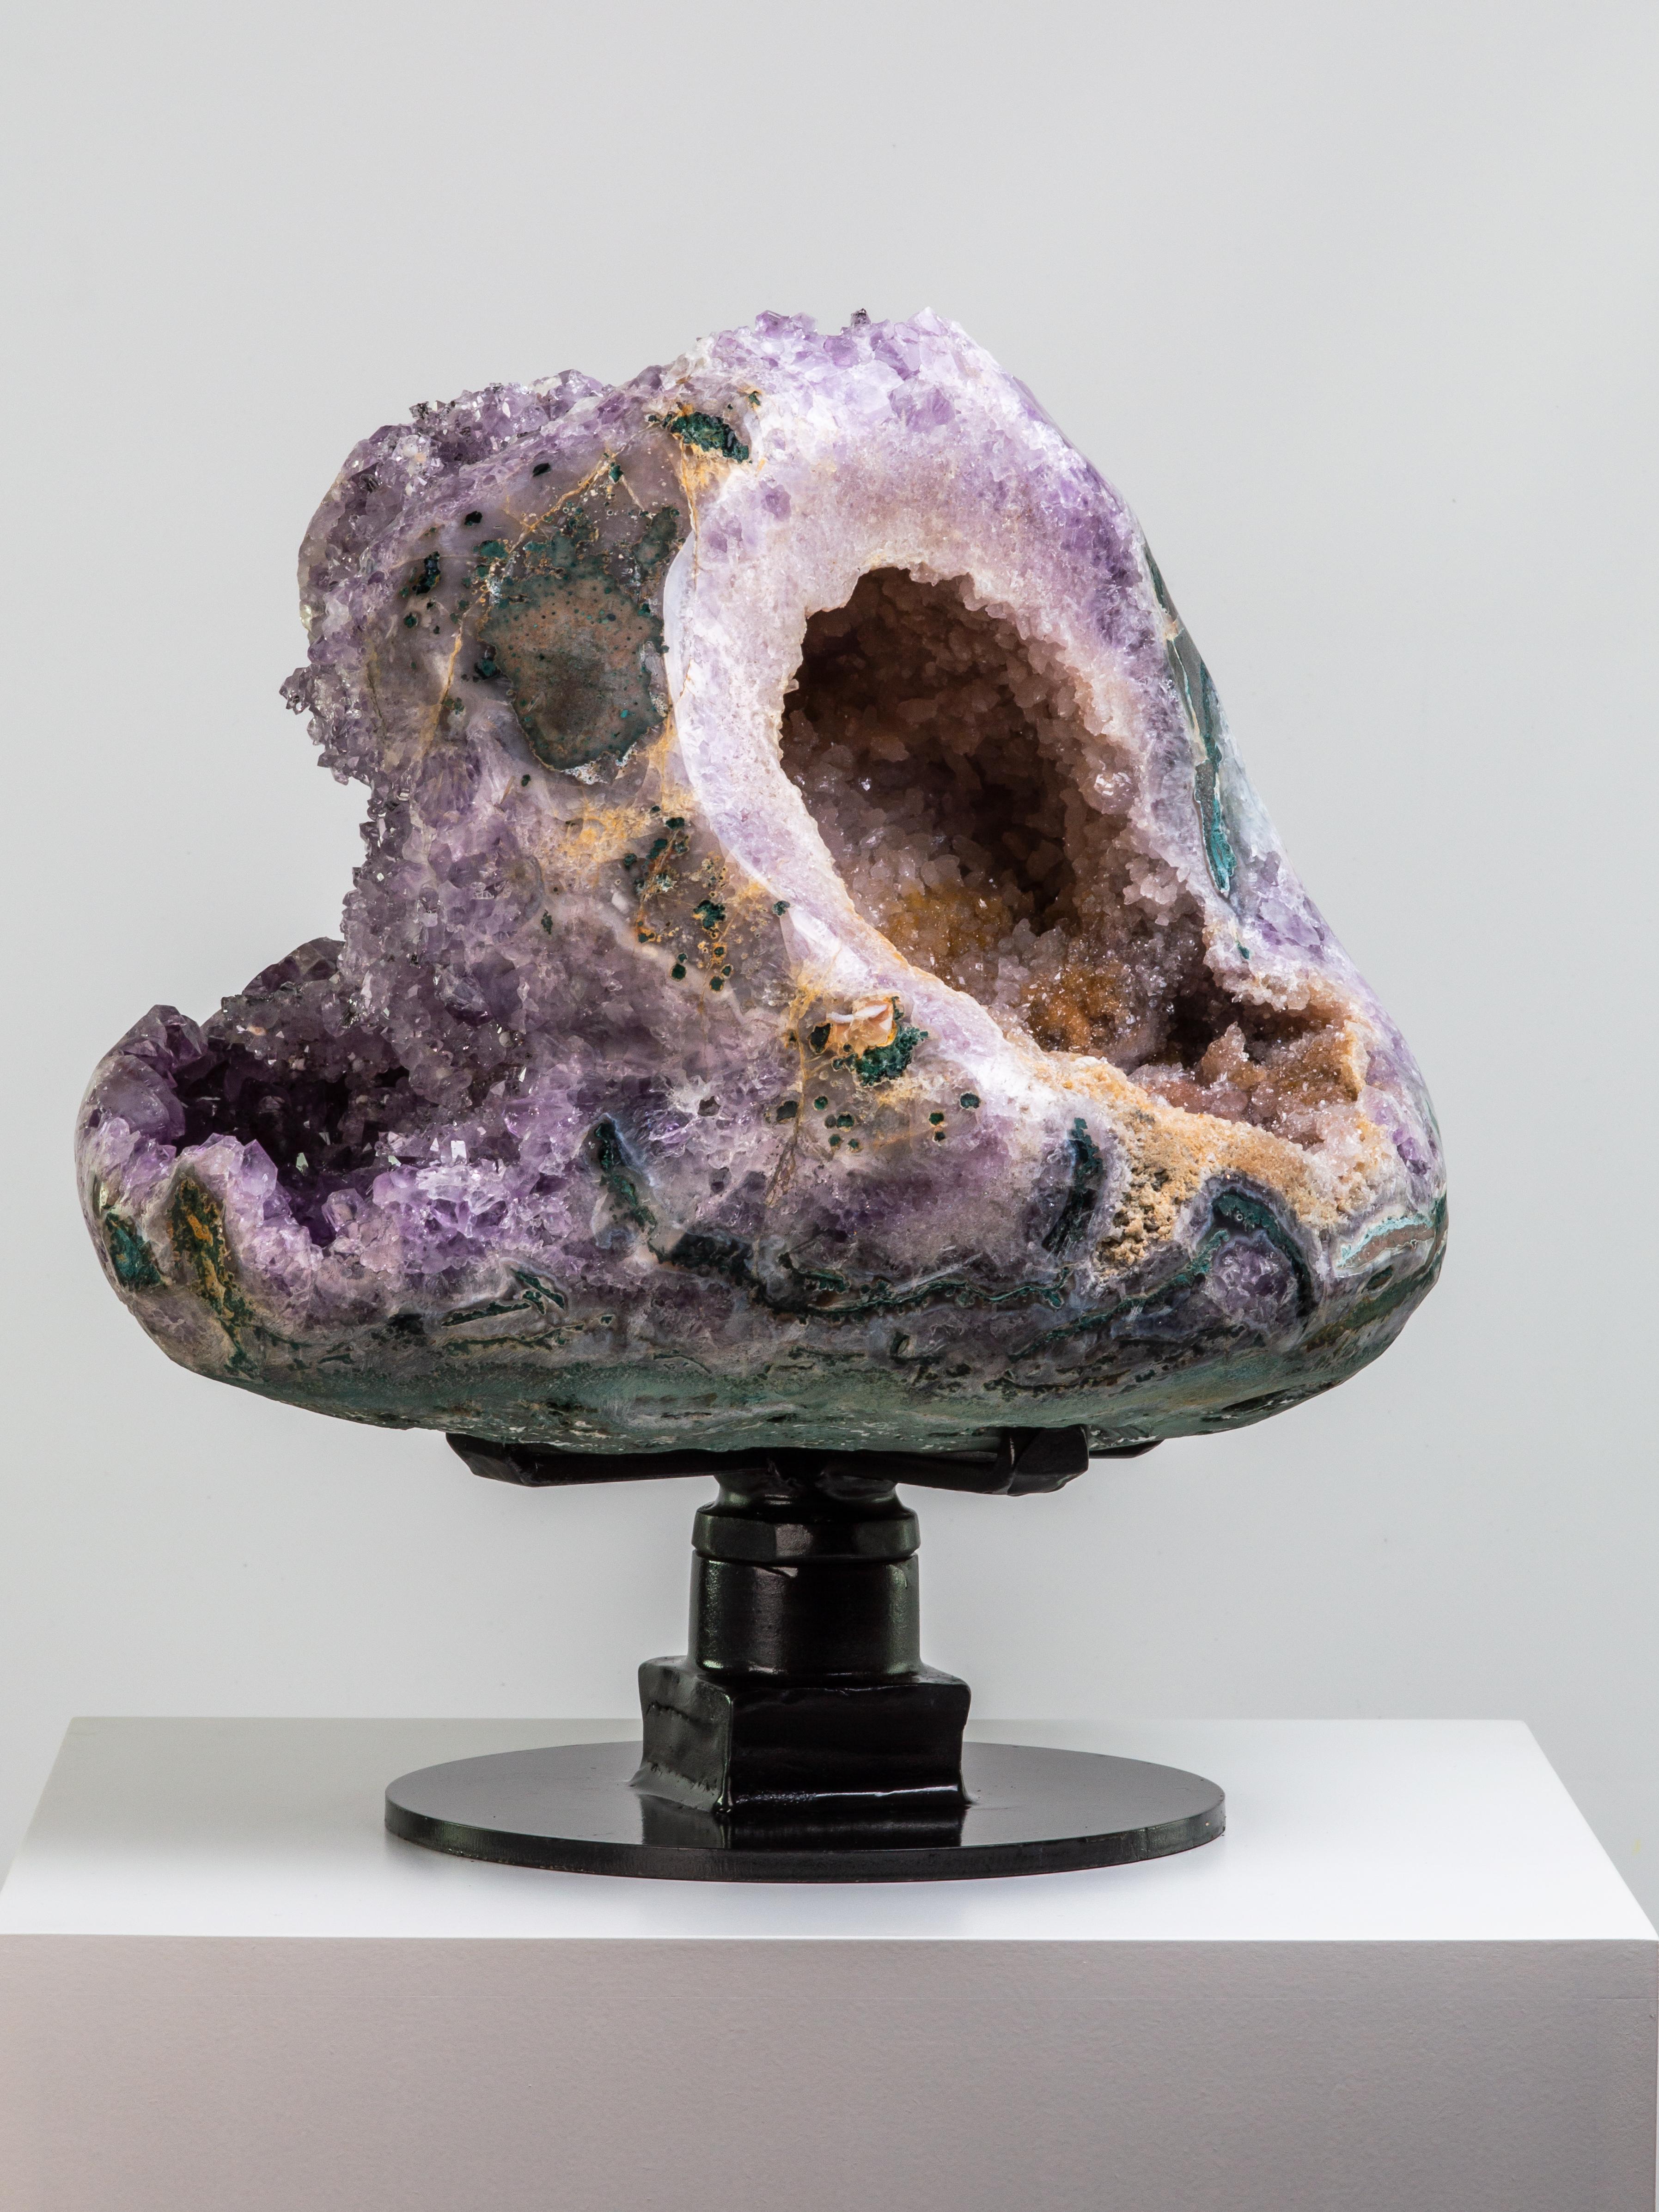 rare geodes for sale